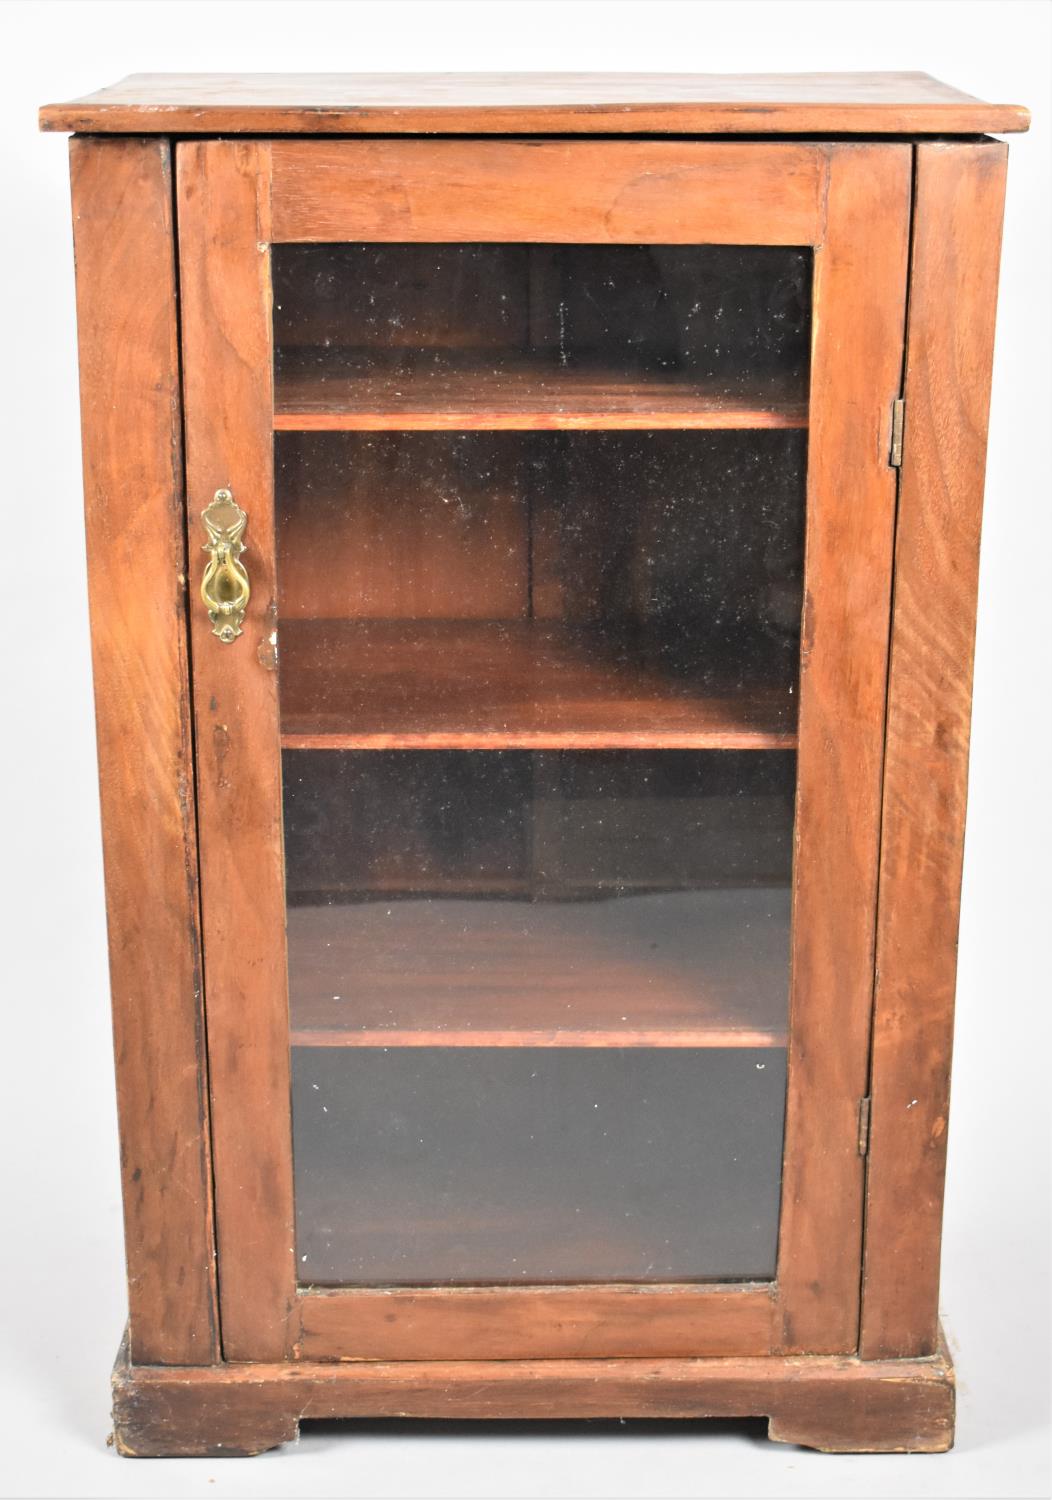 An Edwardian Glazed and Shelved Side Cabinet in Walnut, 55cm Wide and 88cm High